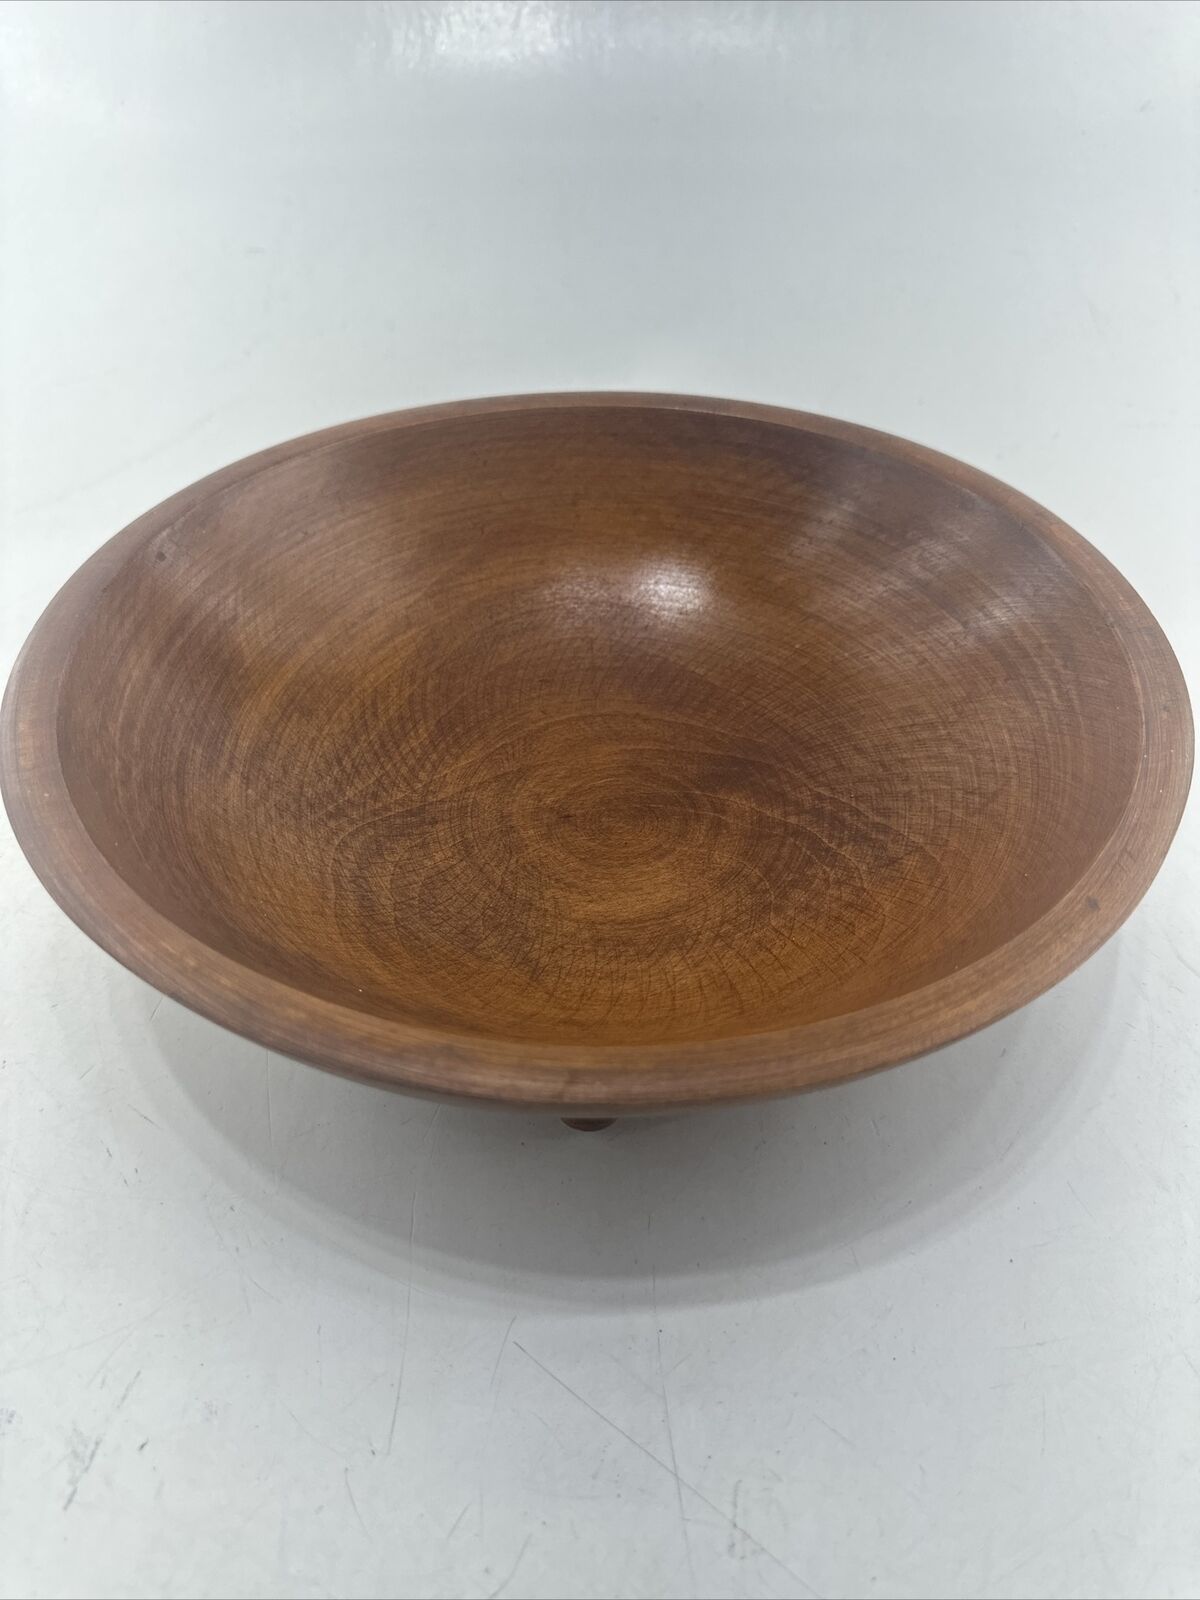 VINTAGE GENUINE WOODCRAFTERY PRODUCT WOODEN BOWL BEAUTIFUL CONDITION 11.5”